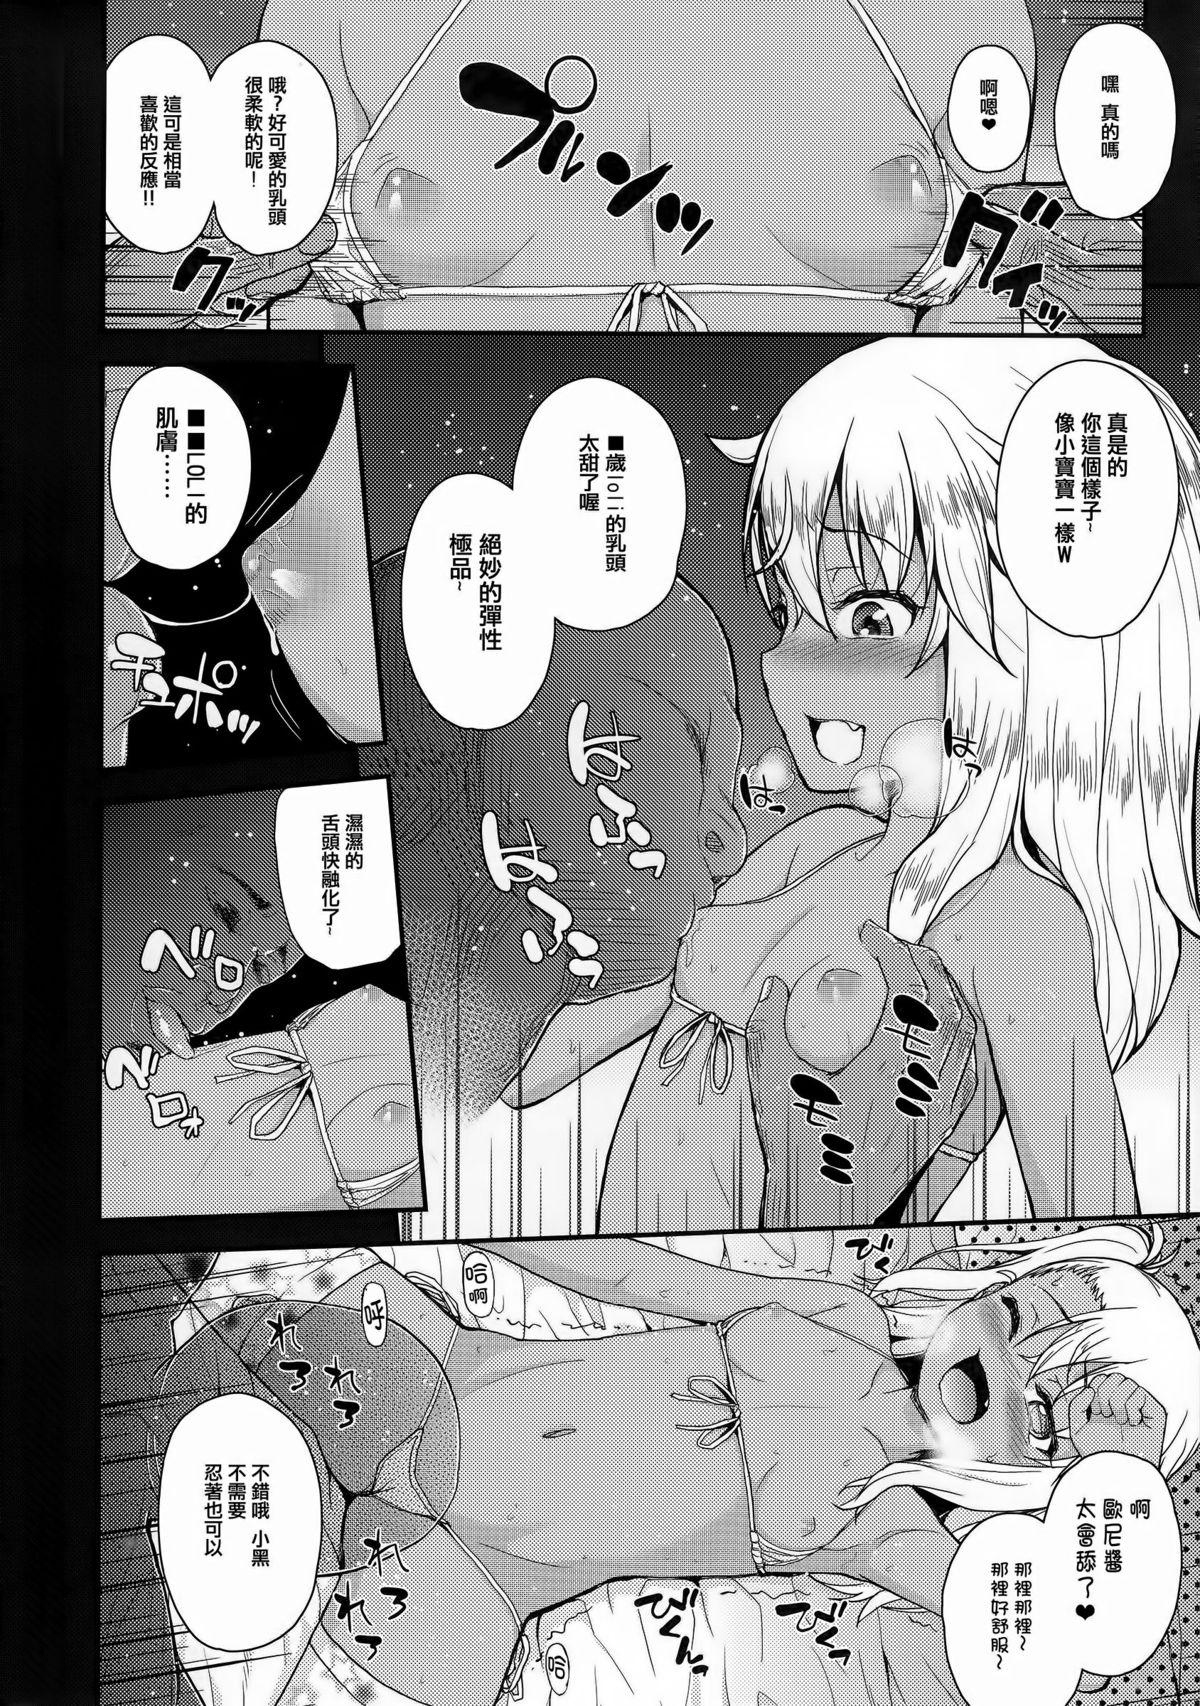 Porn Pussy Kuroe-chan no Iru Omise - Fate kaleid liner prisma illya And - Page 6